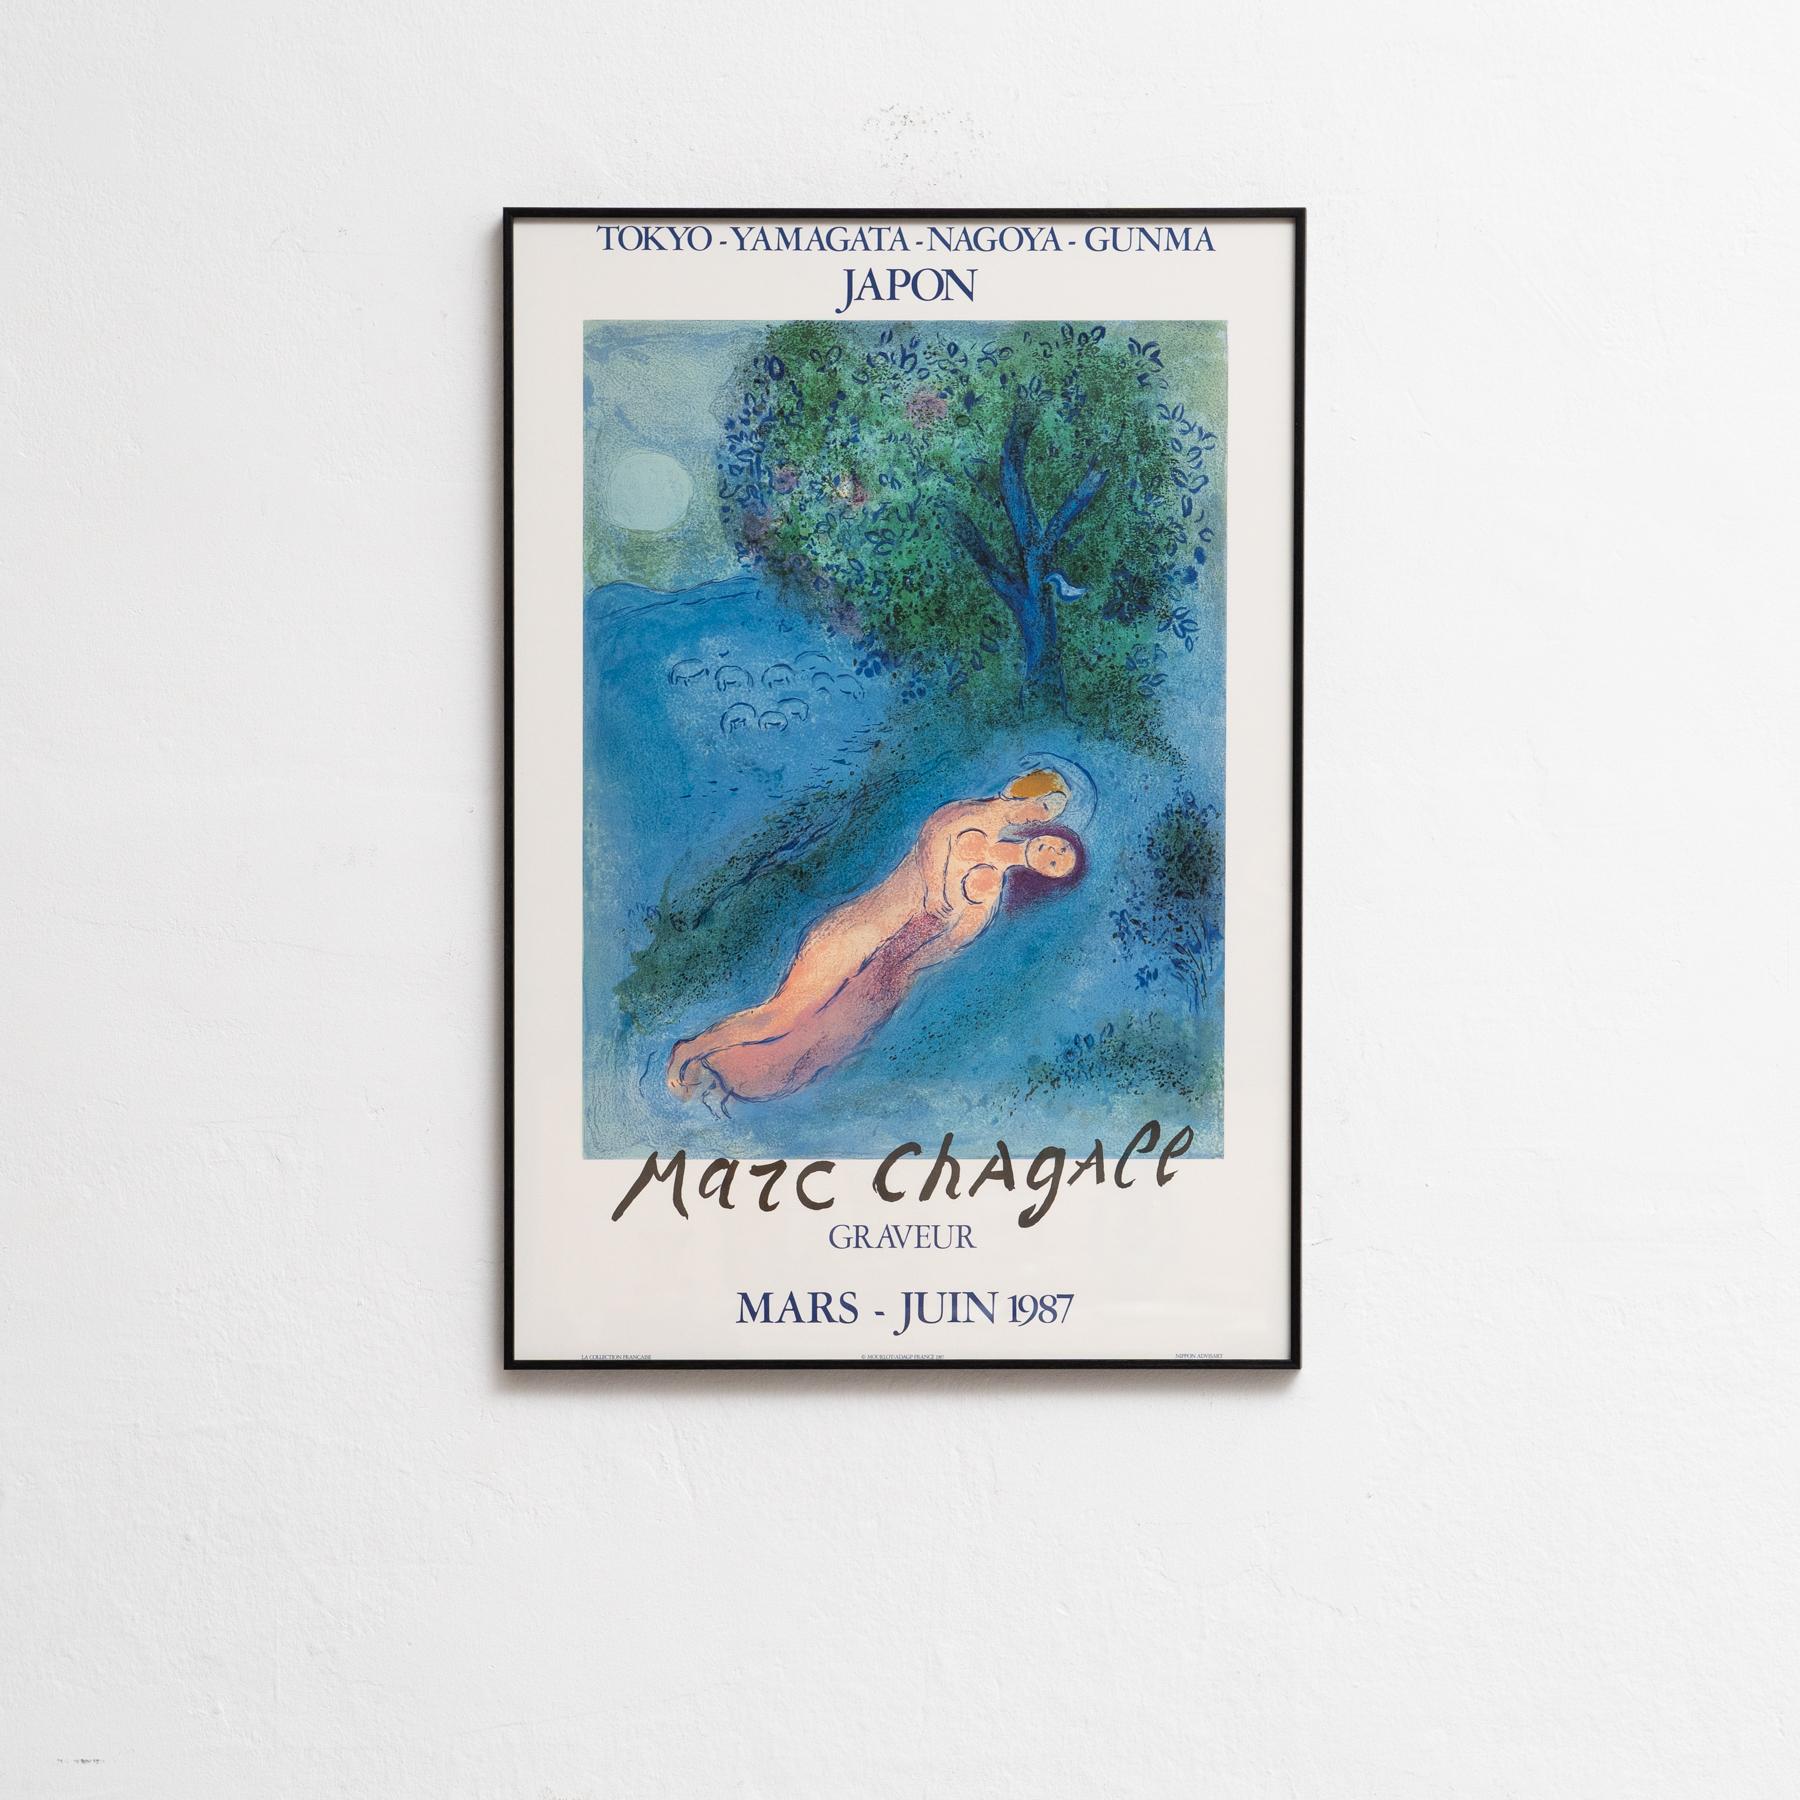 Add a splash of vibrant color to your space with this charming Marc Chagall poster, exquisitely printed by Mourlot in 1987. Known for his dreamlike compositions and imaginative use of color, Chagall's artwork continues to inspire and enchant viewers